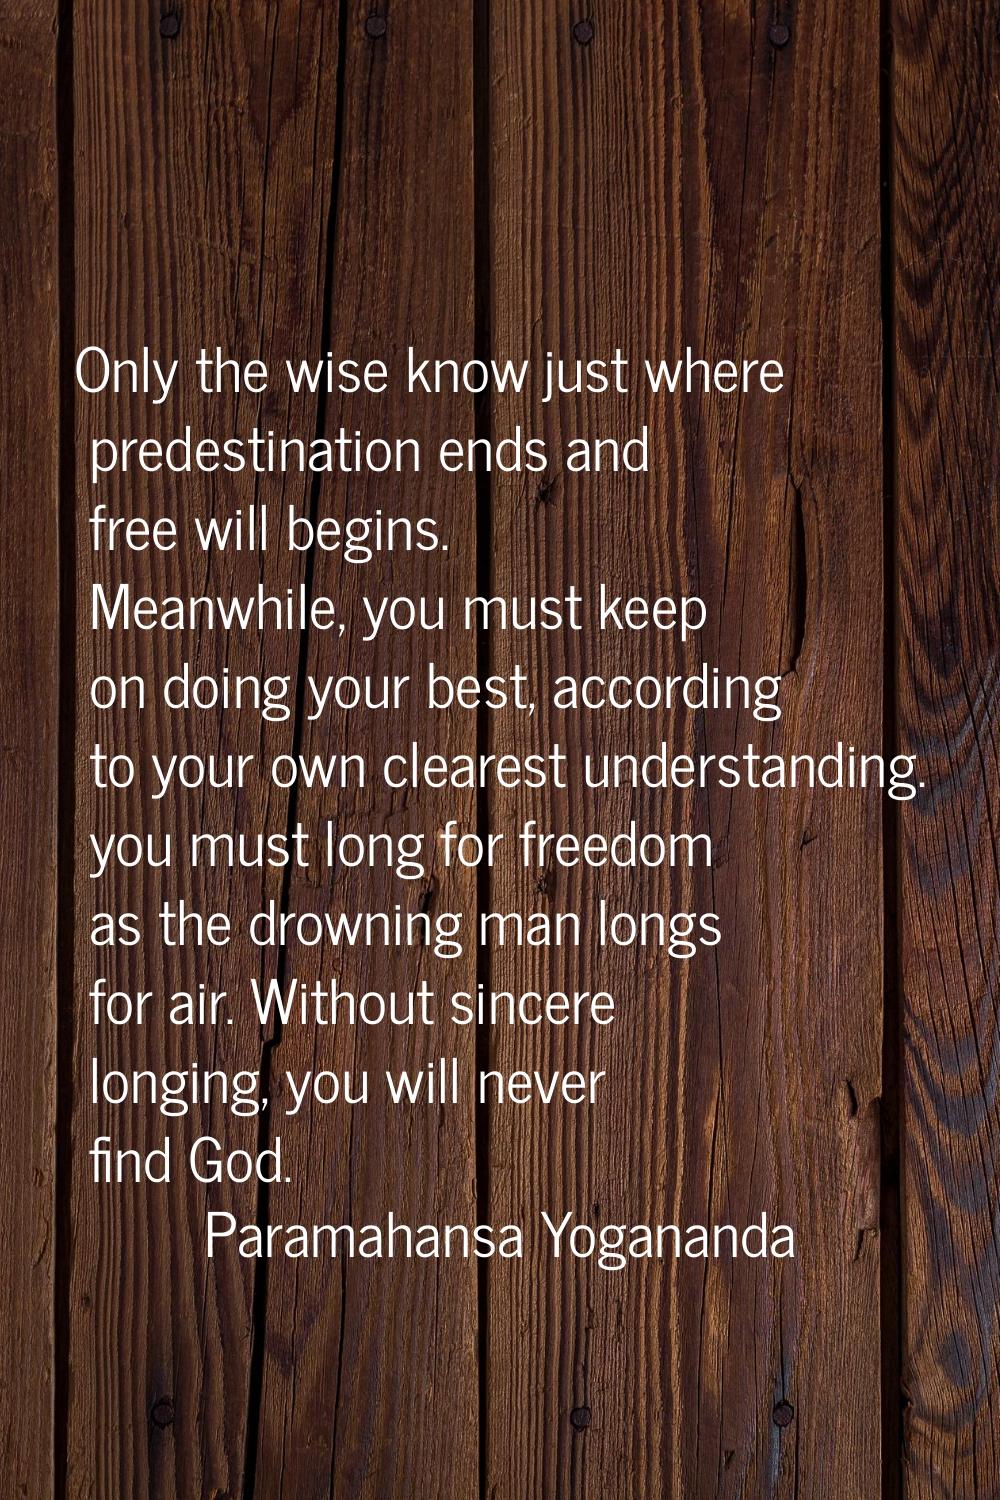 Only the wise know just where predestination ends and free will begins. Meanwhile, you must keep on